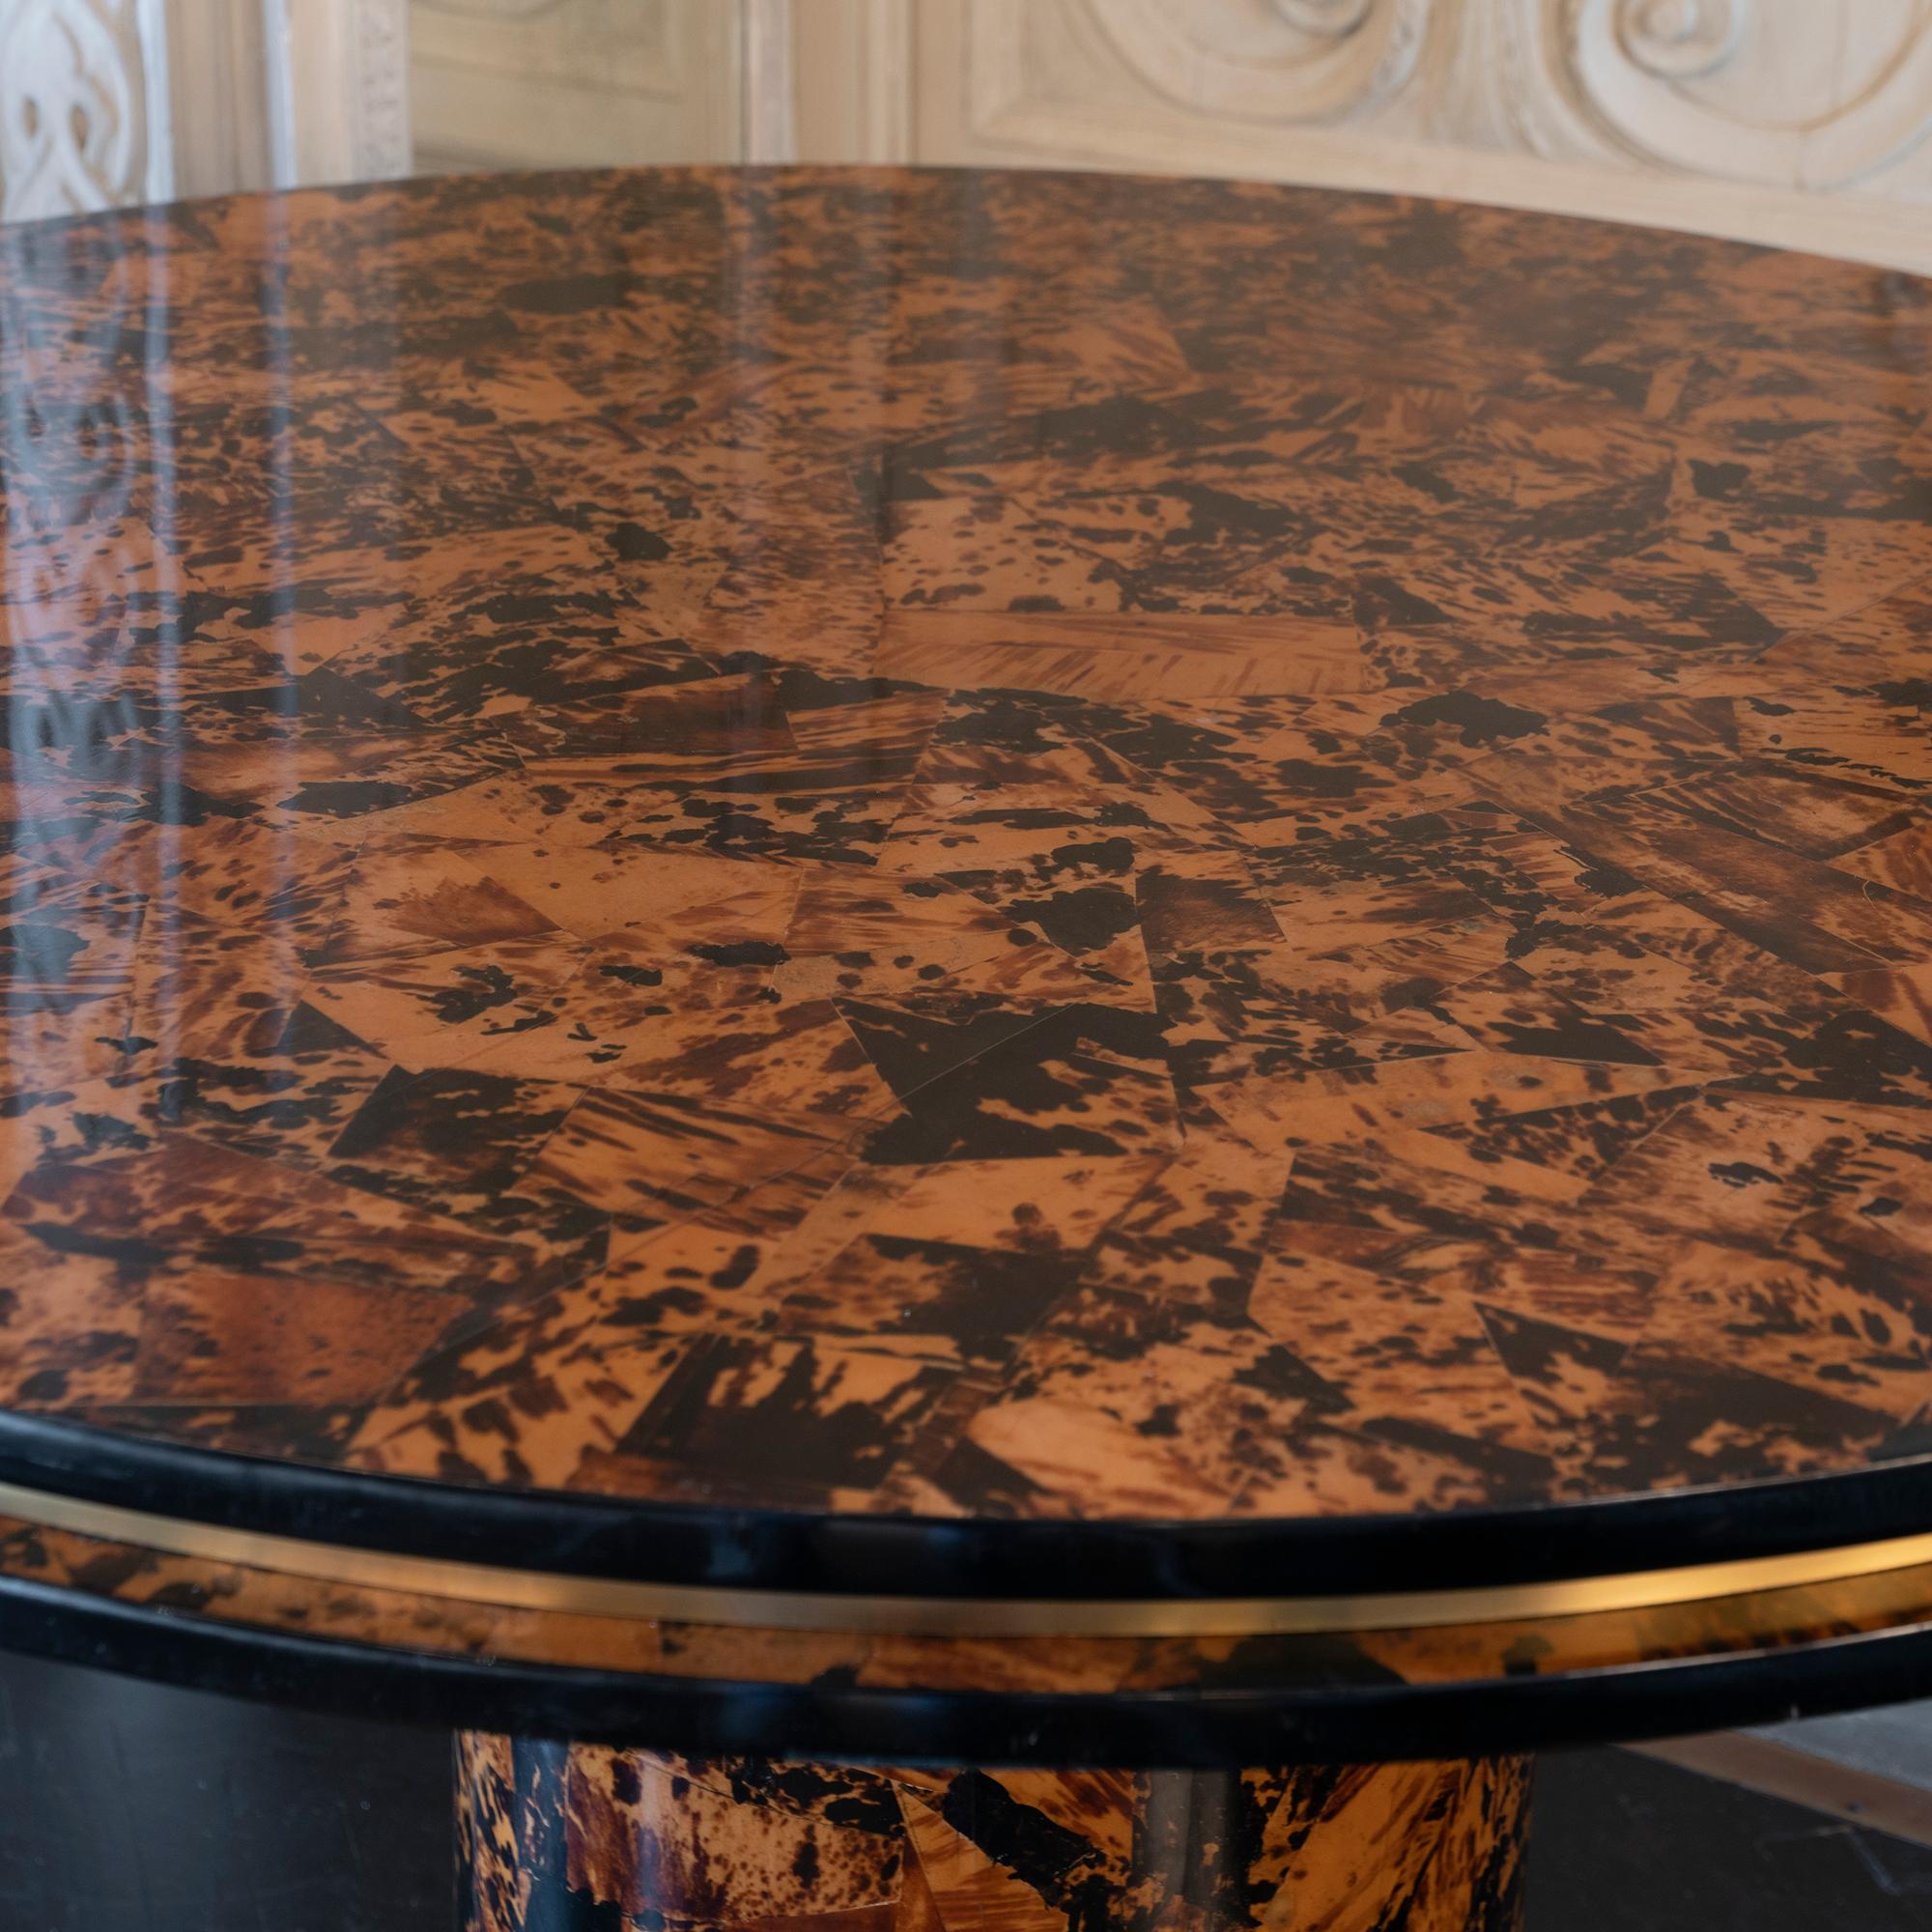 Round center/dining table covered in lacquered burl wood with brass details designed by Willy Rizzo in the 1960s, the top surface burl wood veneer has visible signs of previous use that may include scratches and a long crack that are being fixed but